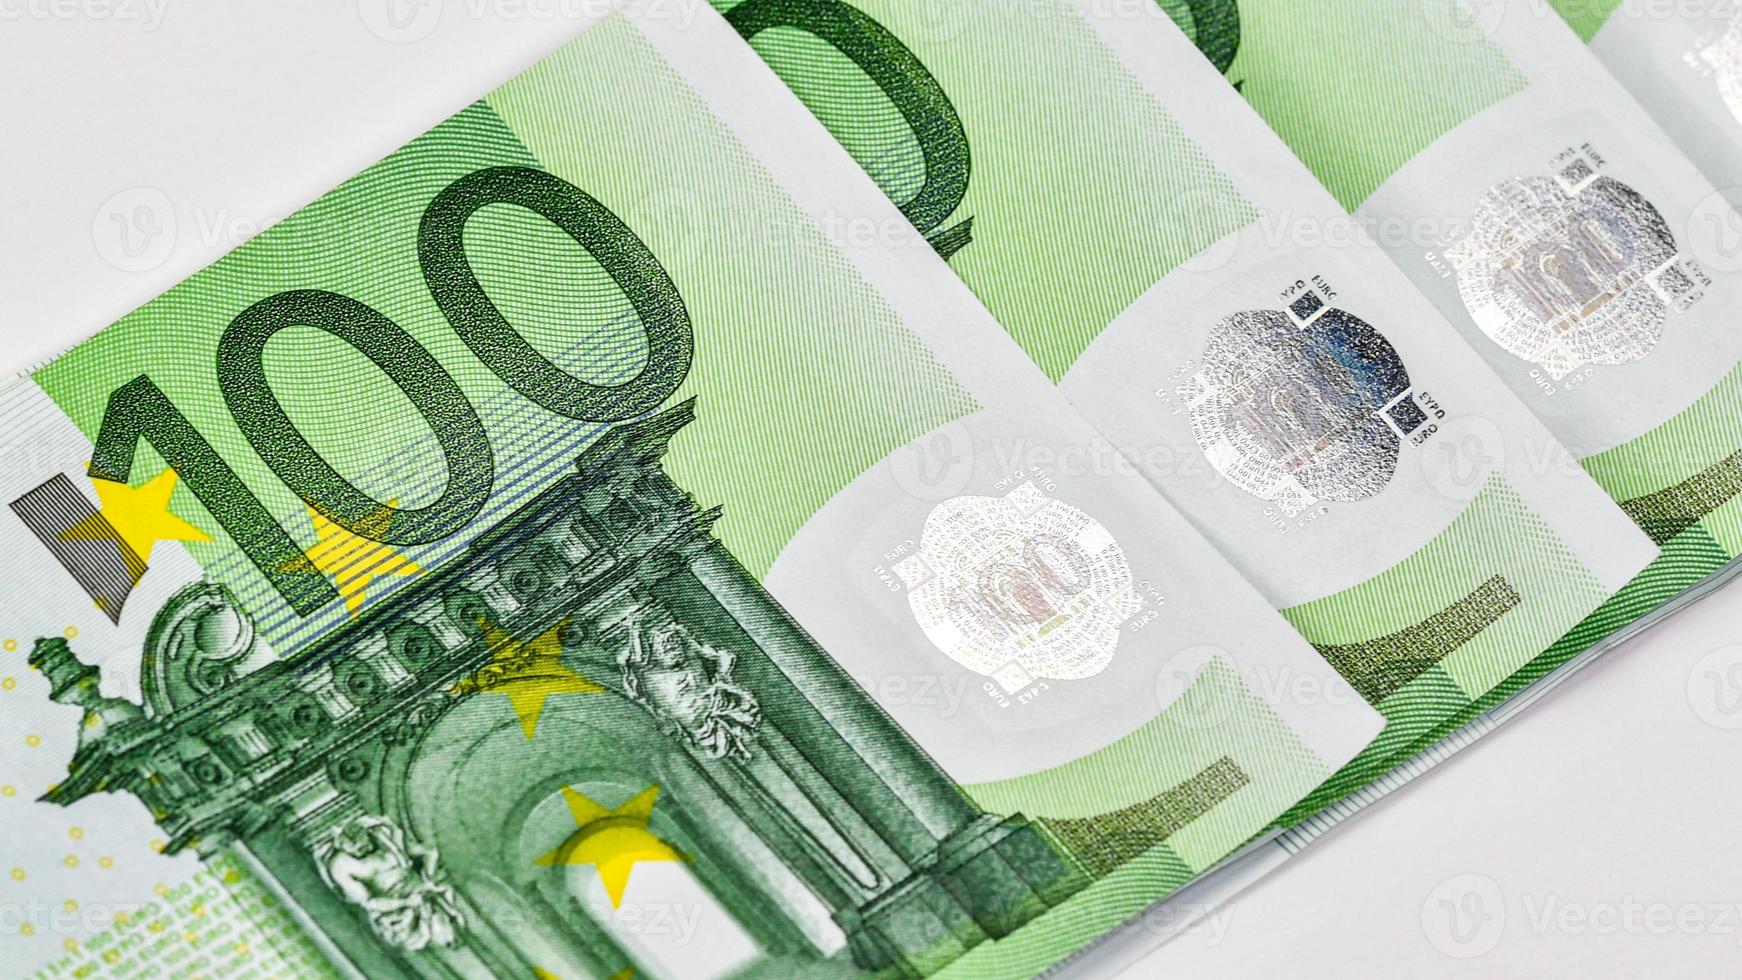 detail of a 100 euro banknote photo